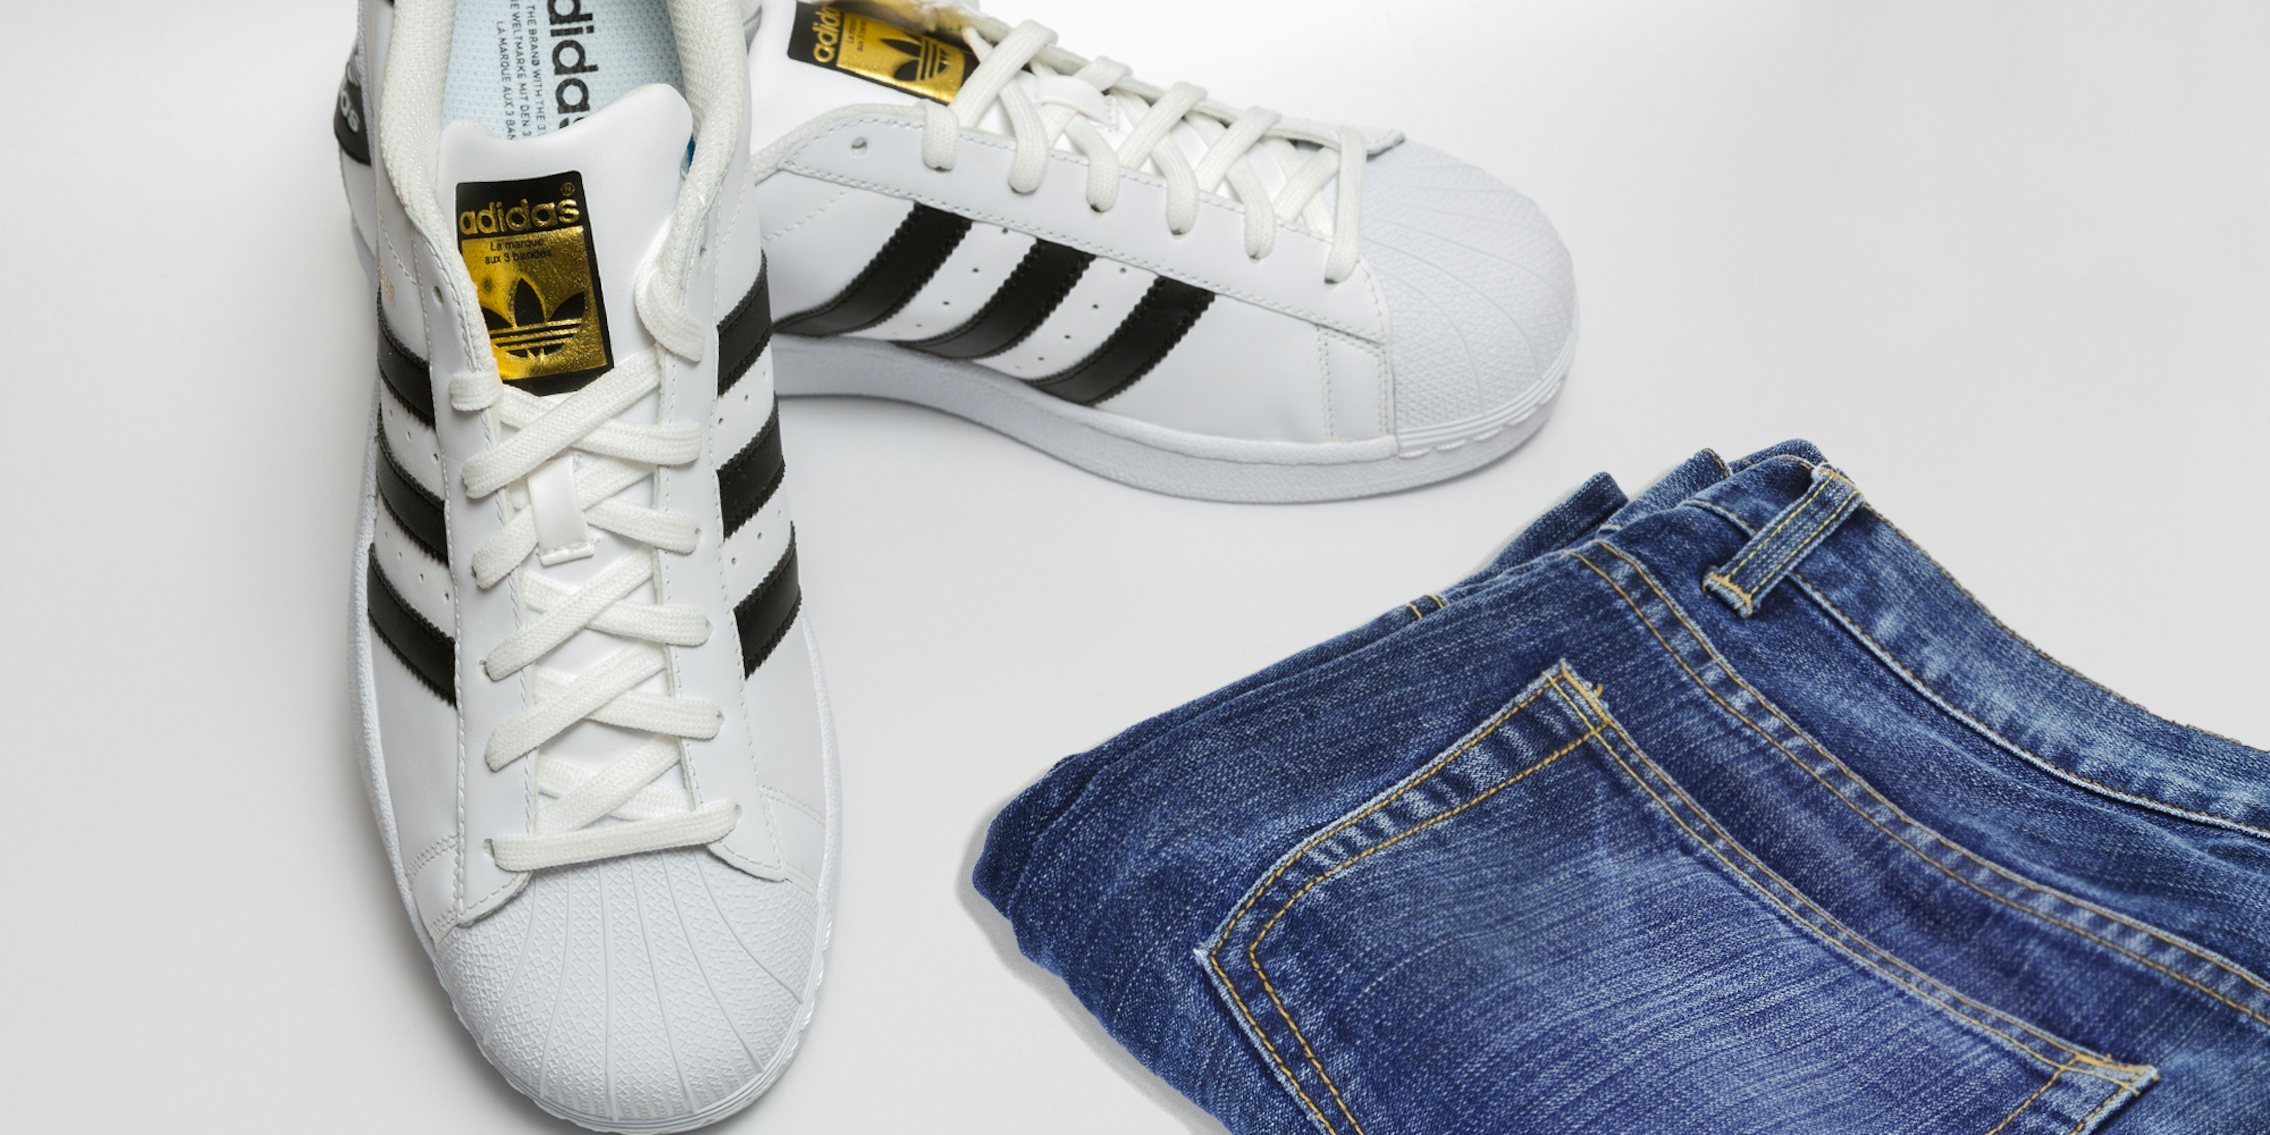 Addidas sneakers on white surface with jean shorts folded